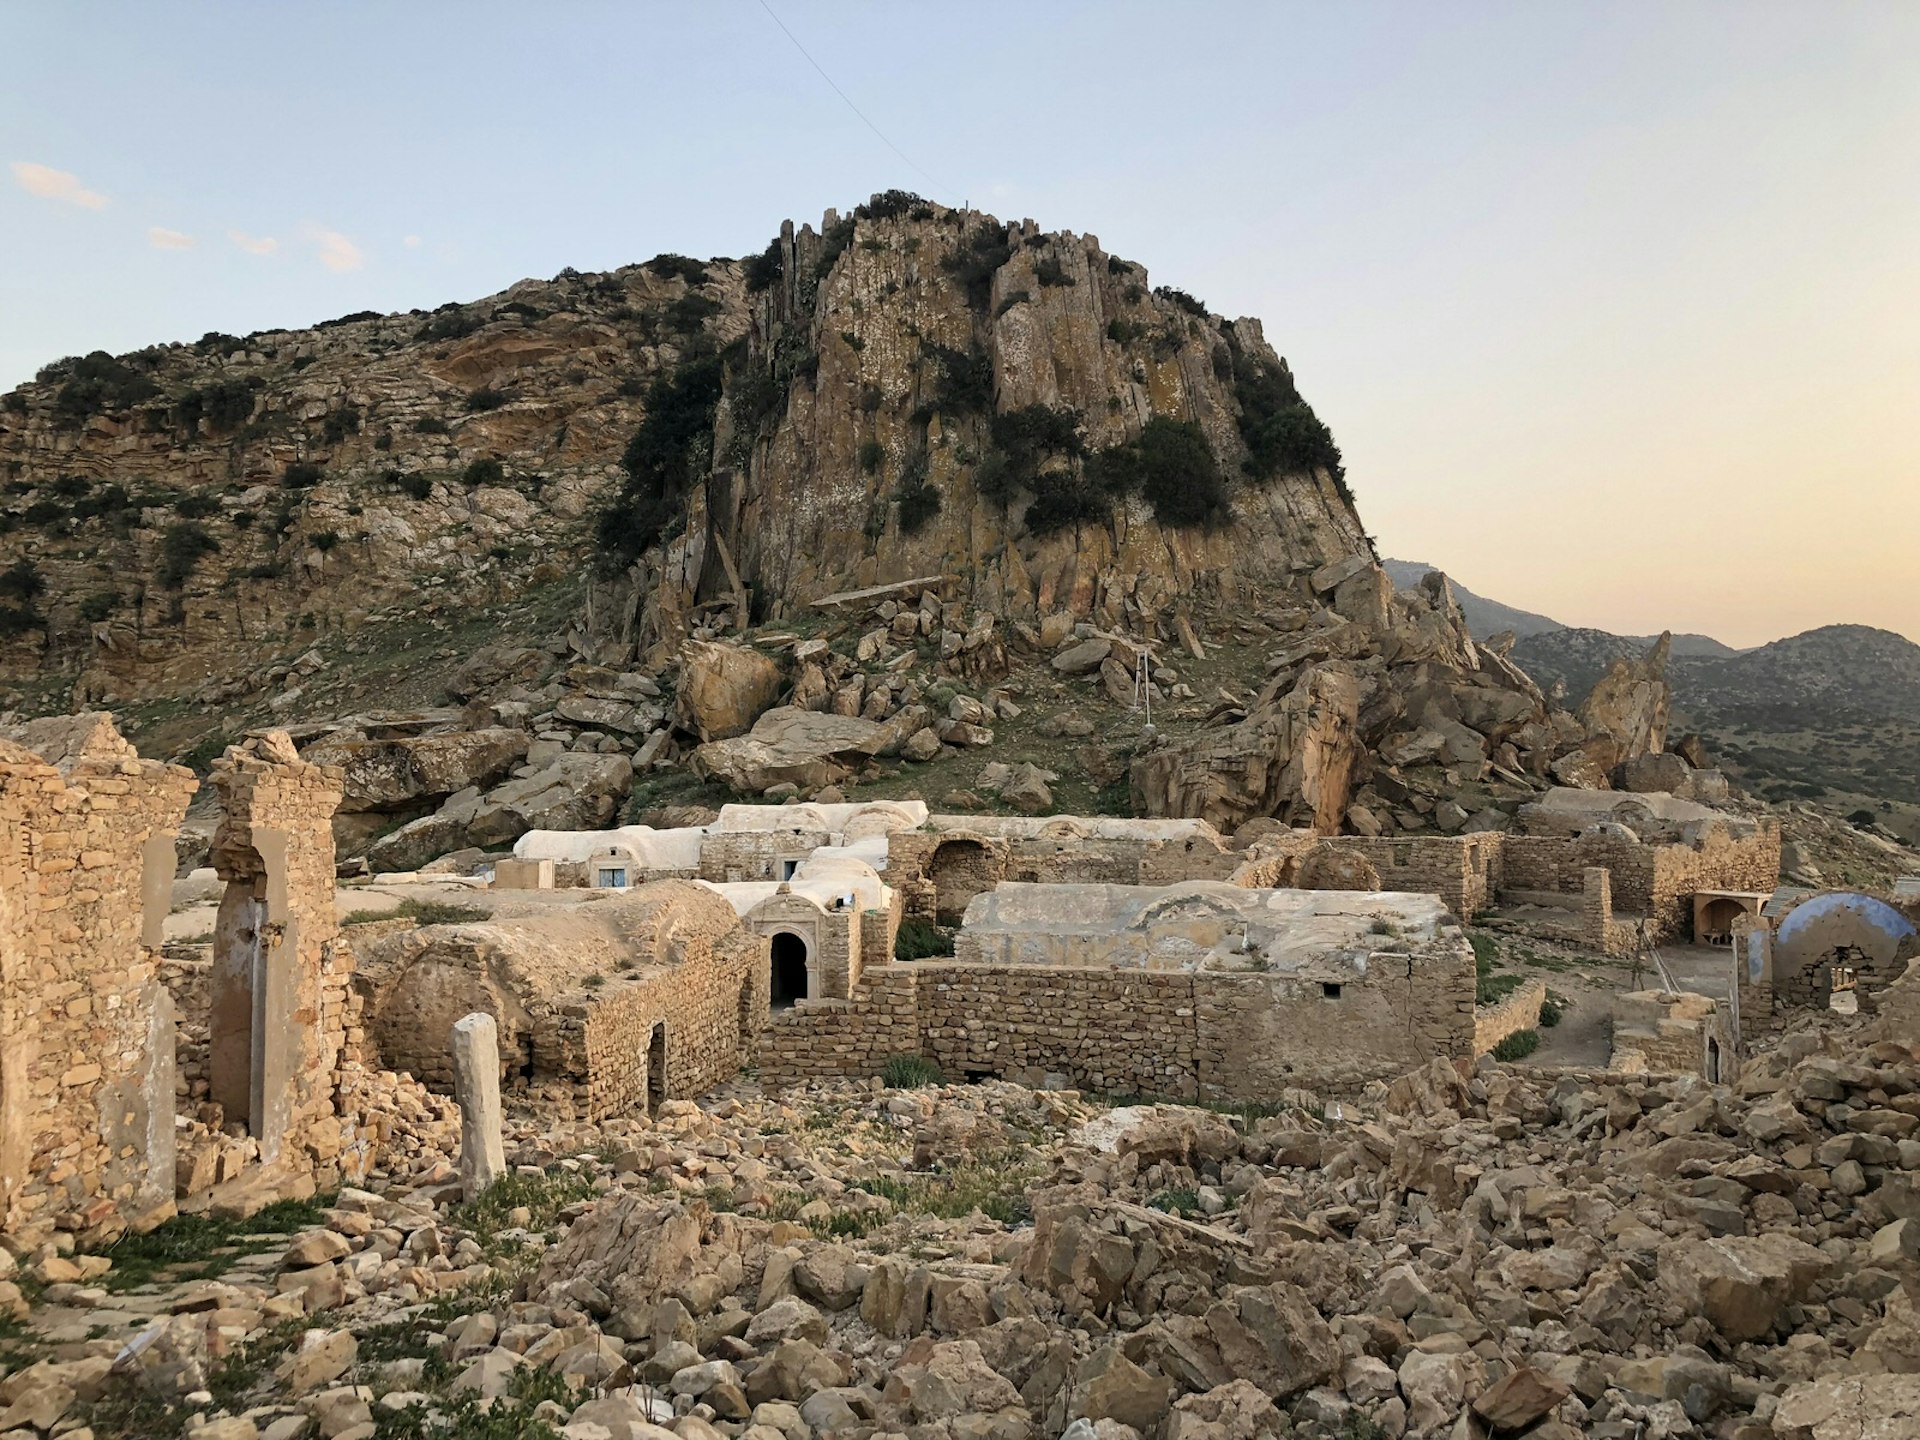 Ruins of the abandoned Berber town of Zriba, Tunisia, at sunset © Lauren Keith / Lonely Planet